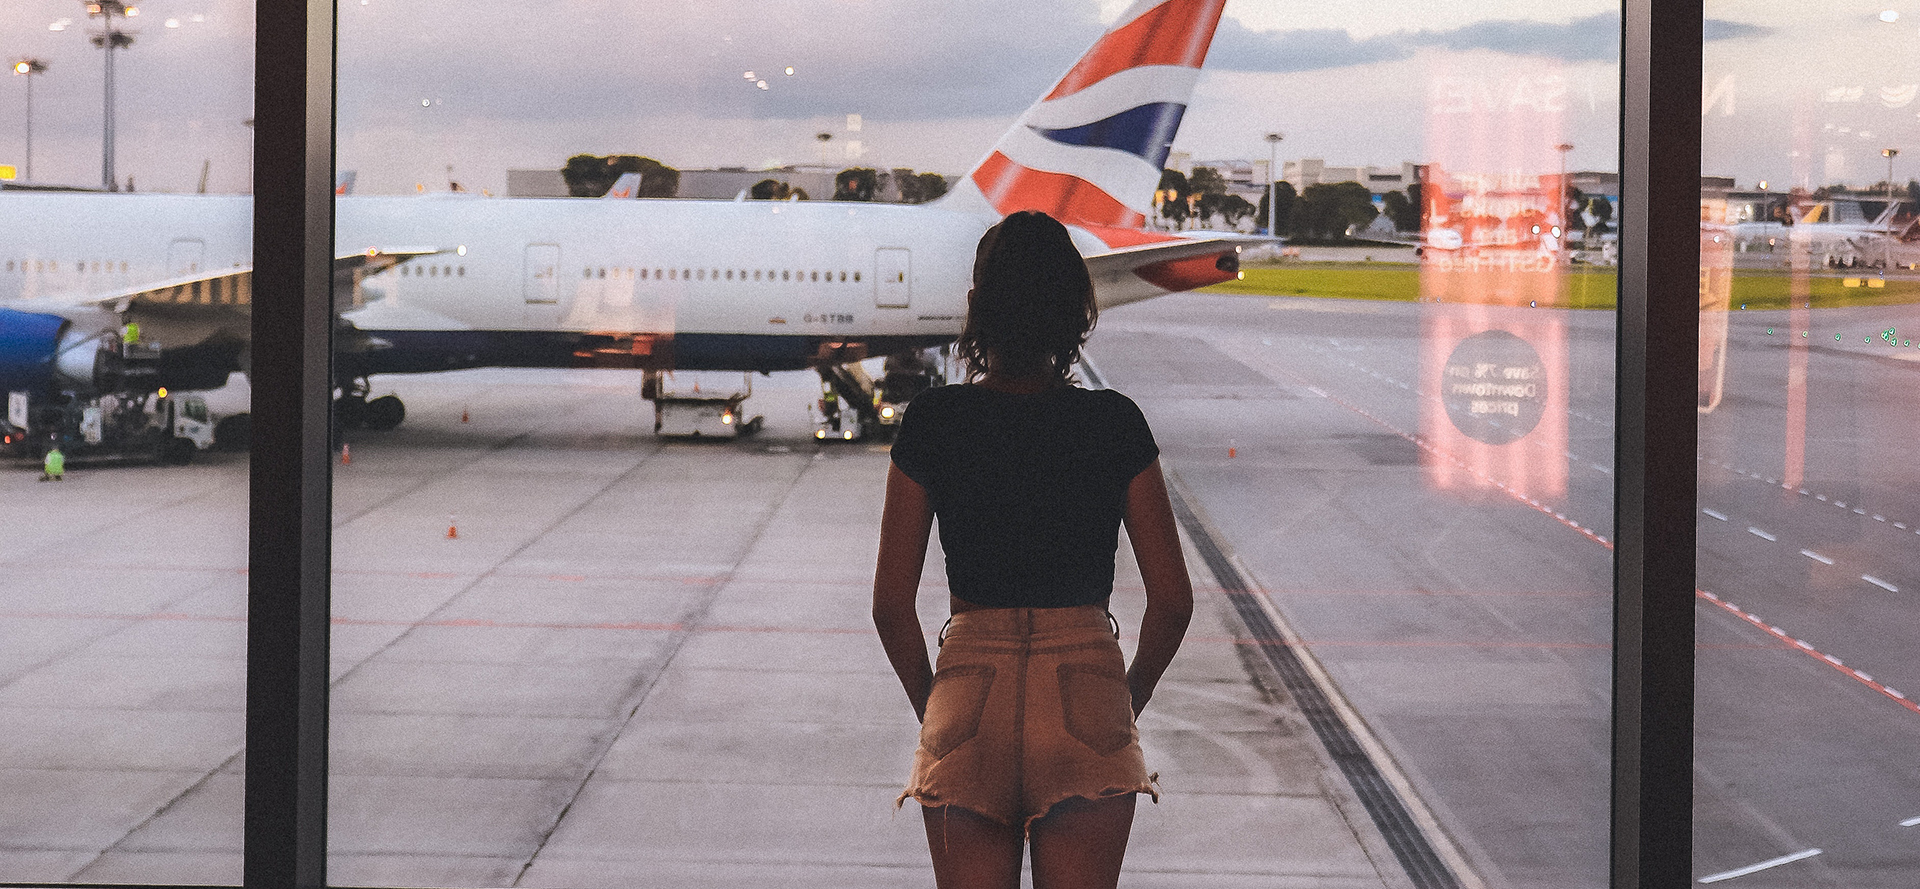 The pilot's girl is waiting for her boyfriend from the flight.